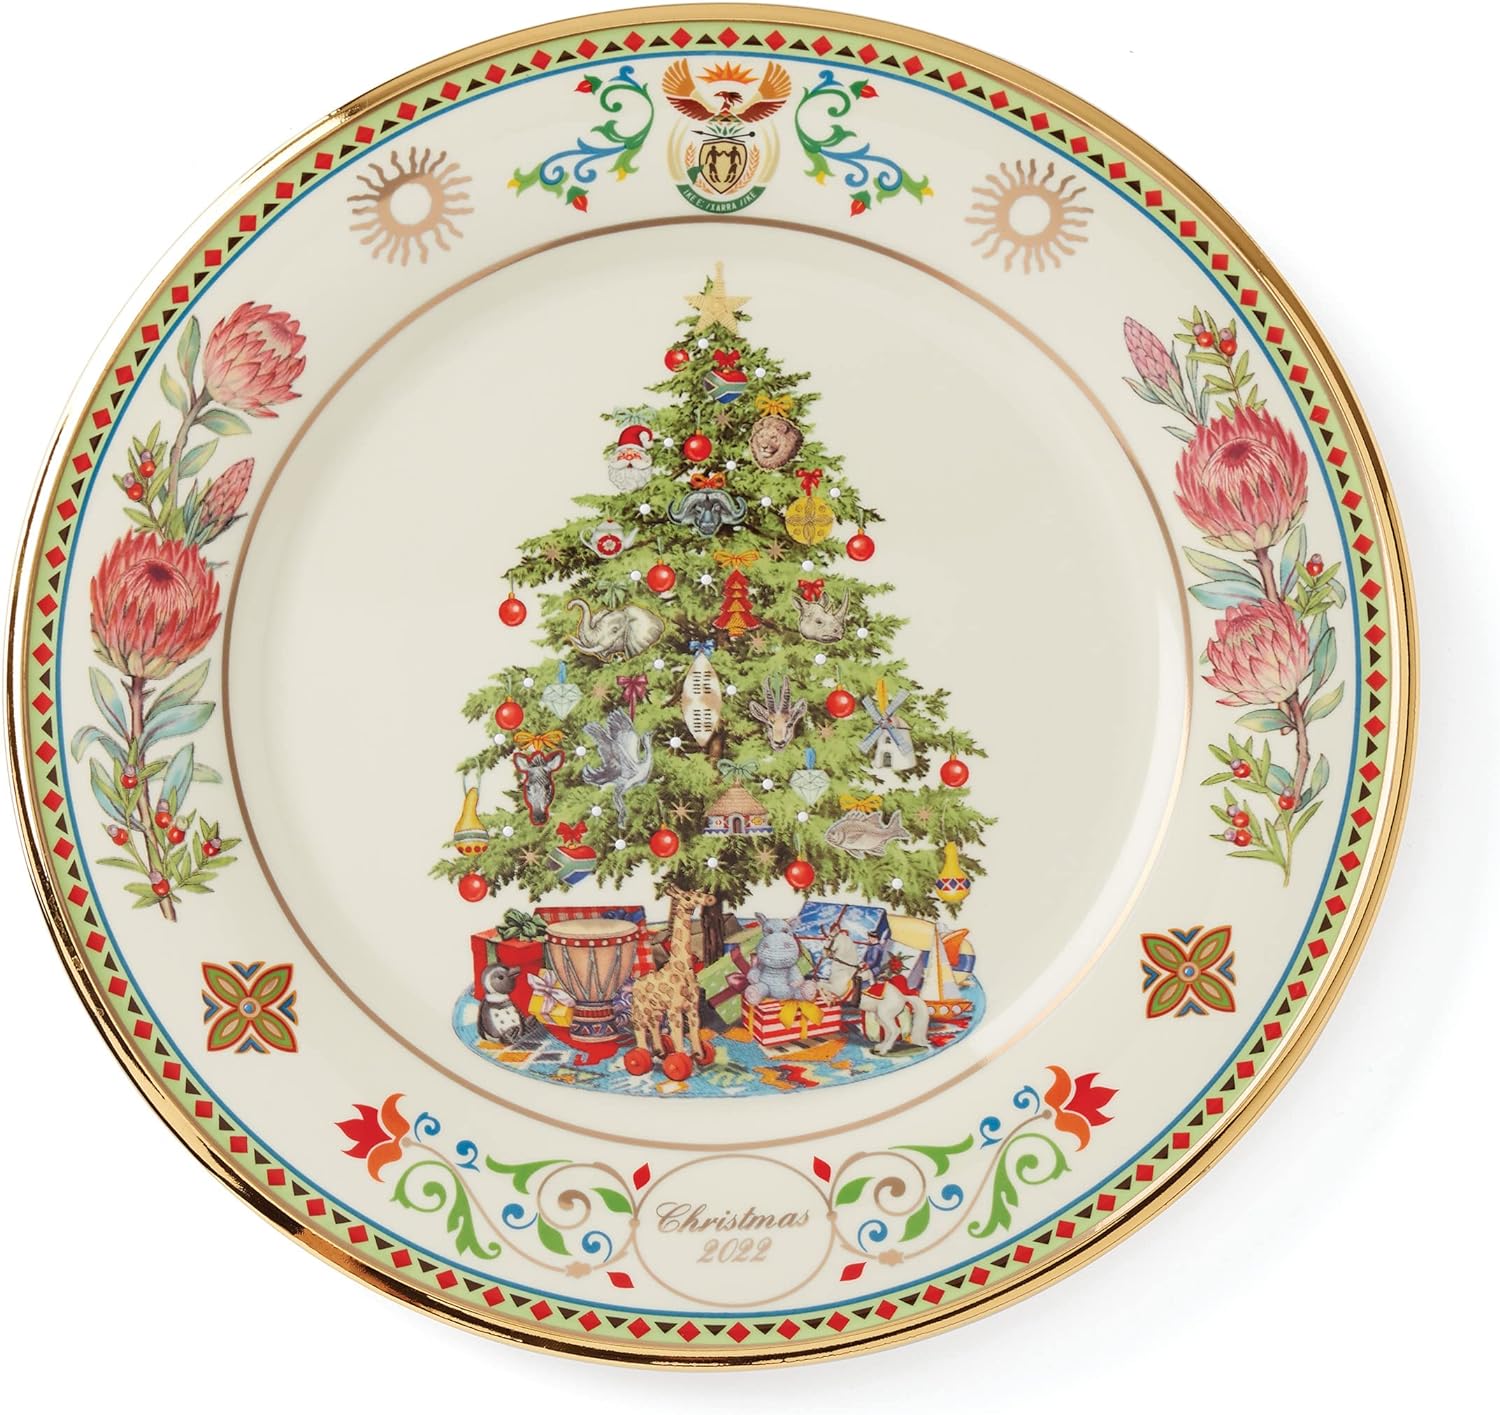 lenox-christmas-trees-around-the-world-plate-2022-south-africa-32nd-in-series-893778.jpg